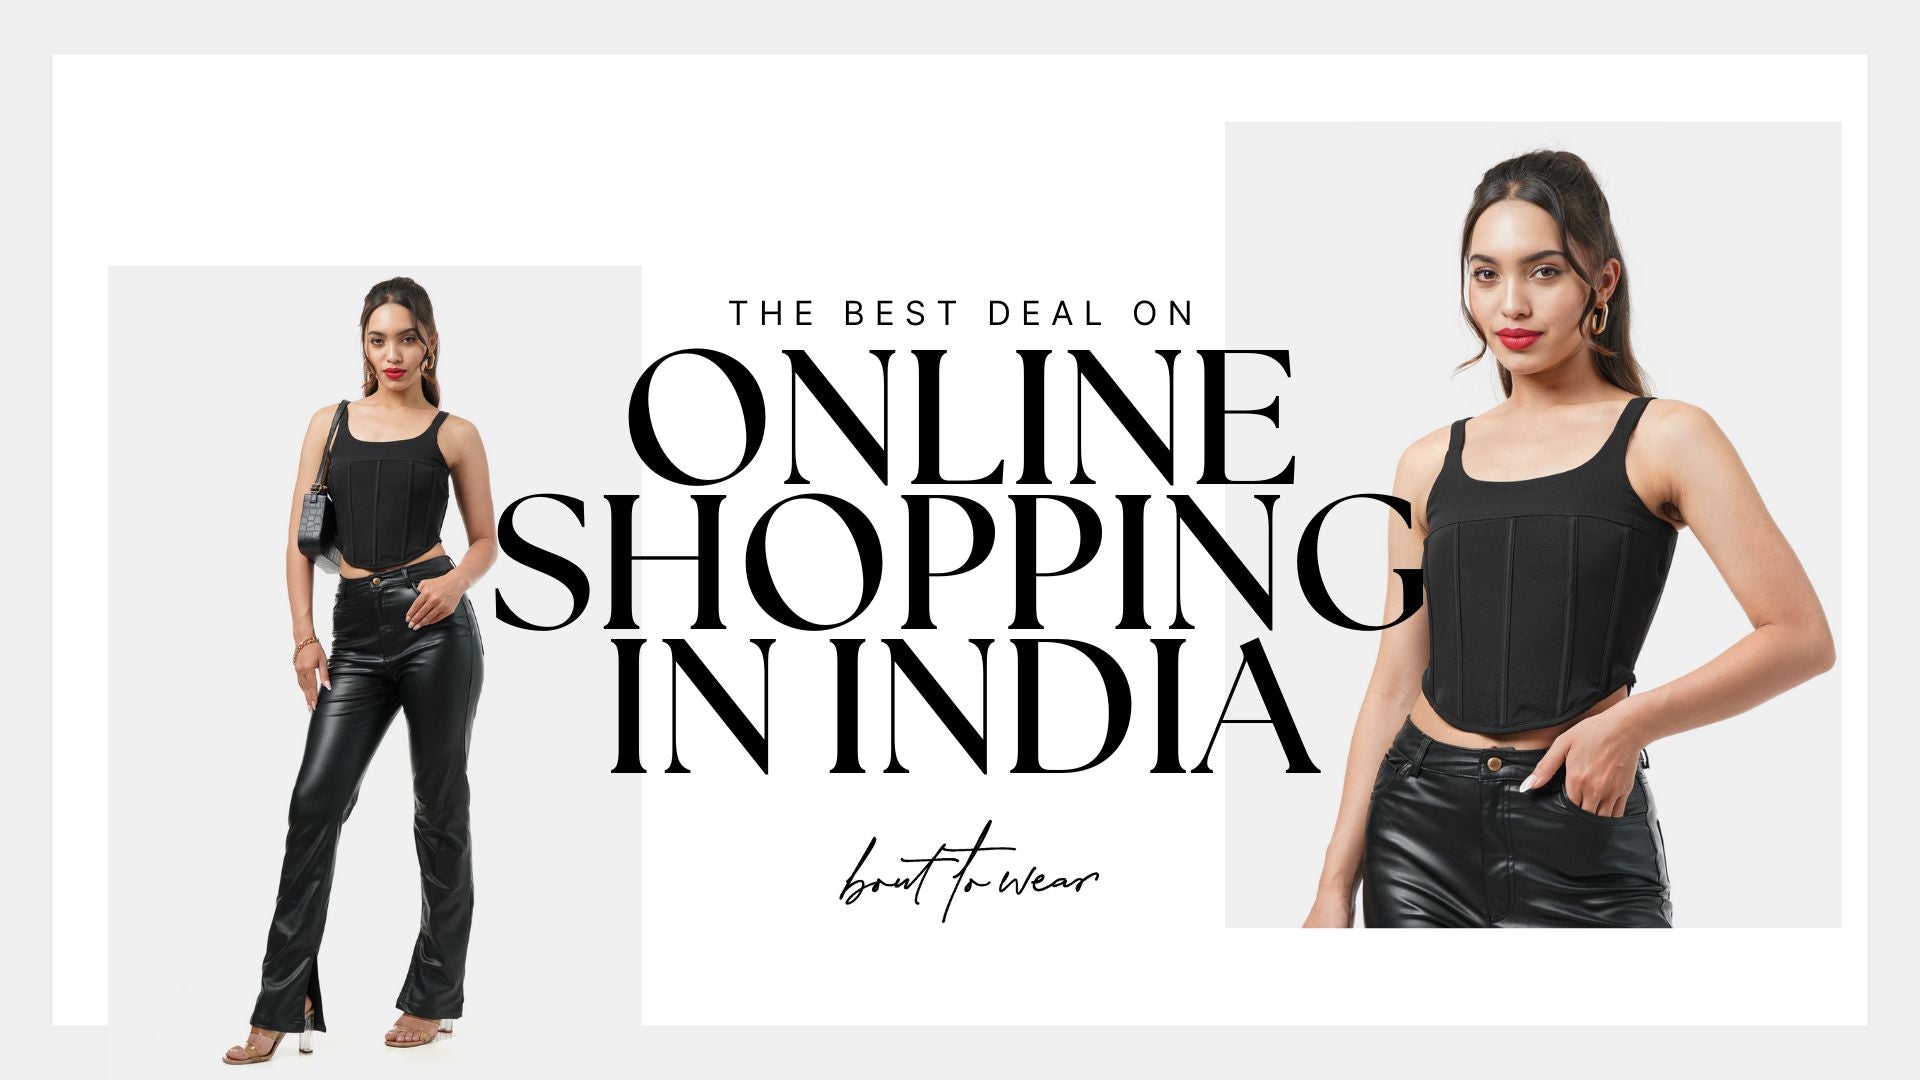 How to find the Best Deal on Online Shopping in India